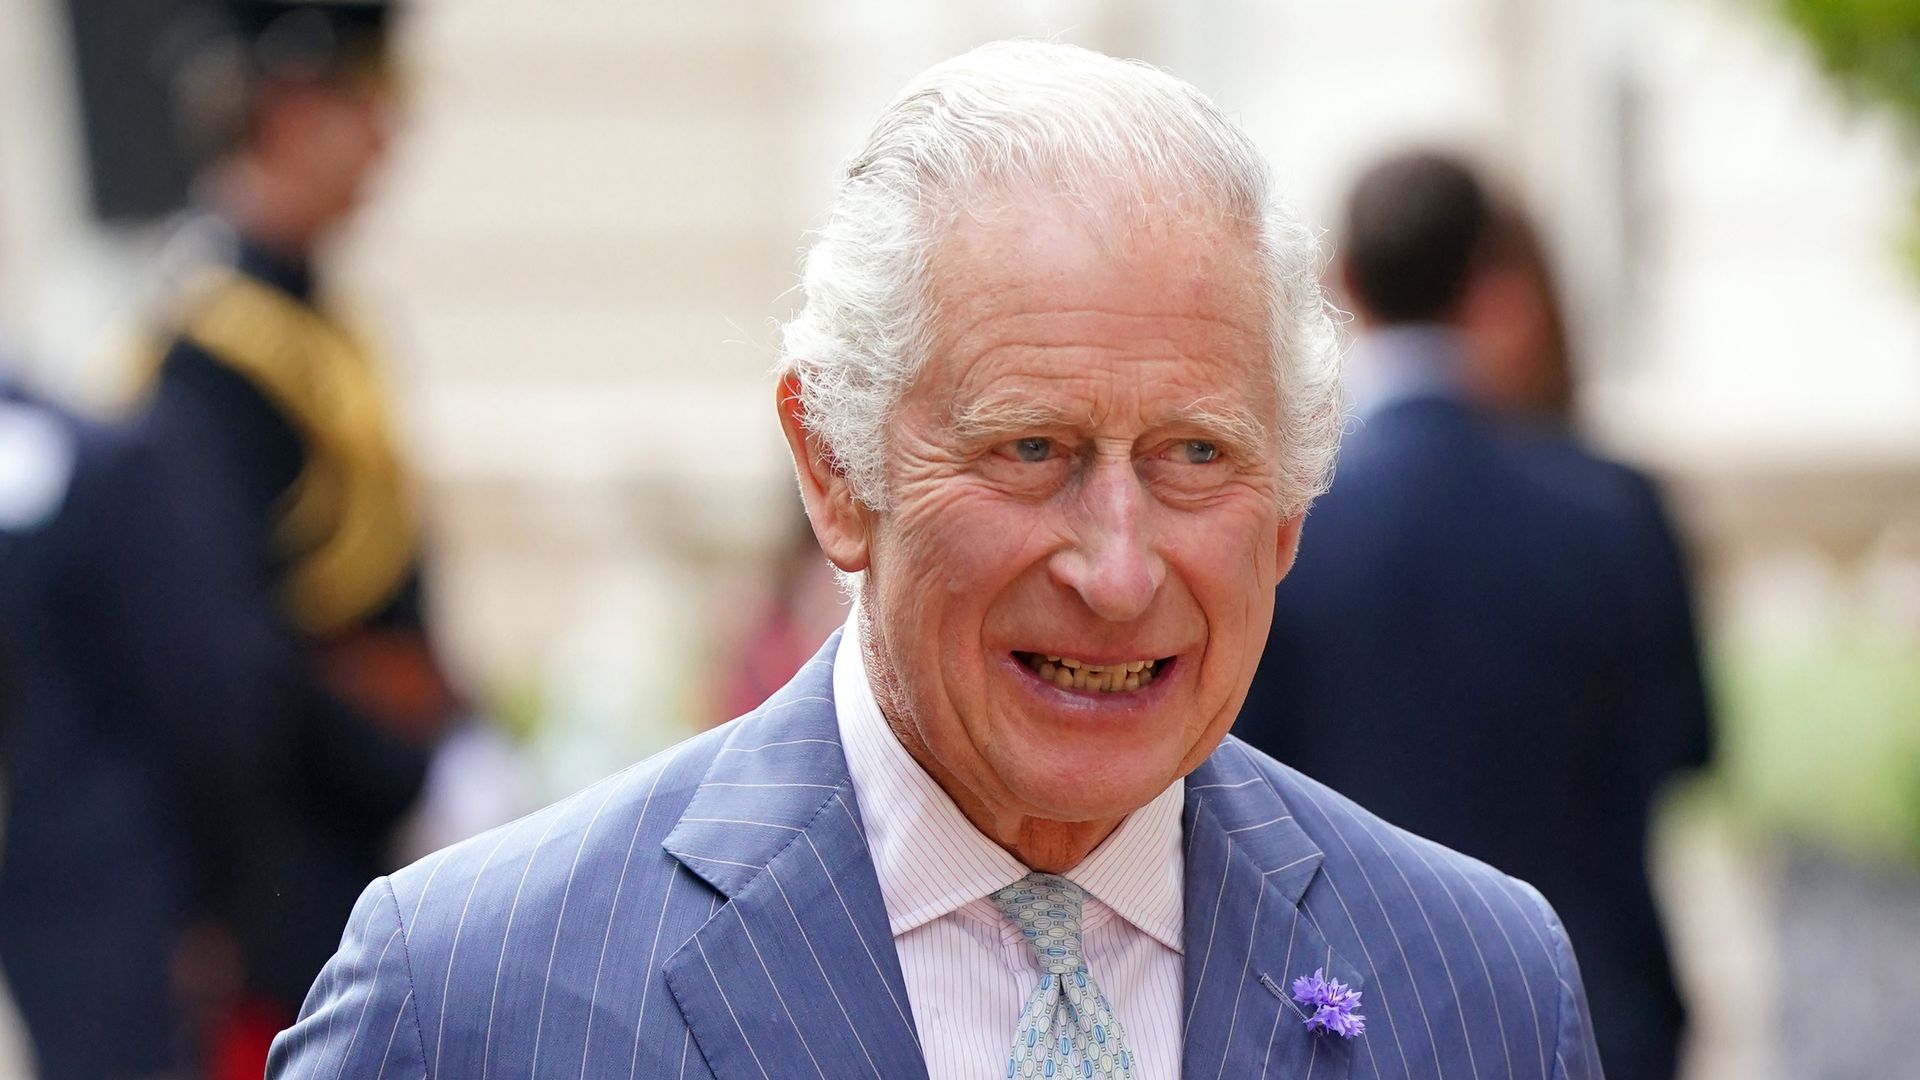 King Charles wears a pinstripe suit and carries a glass of Pimm's